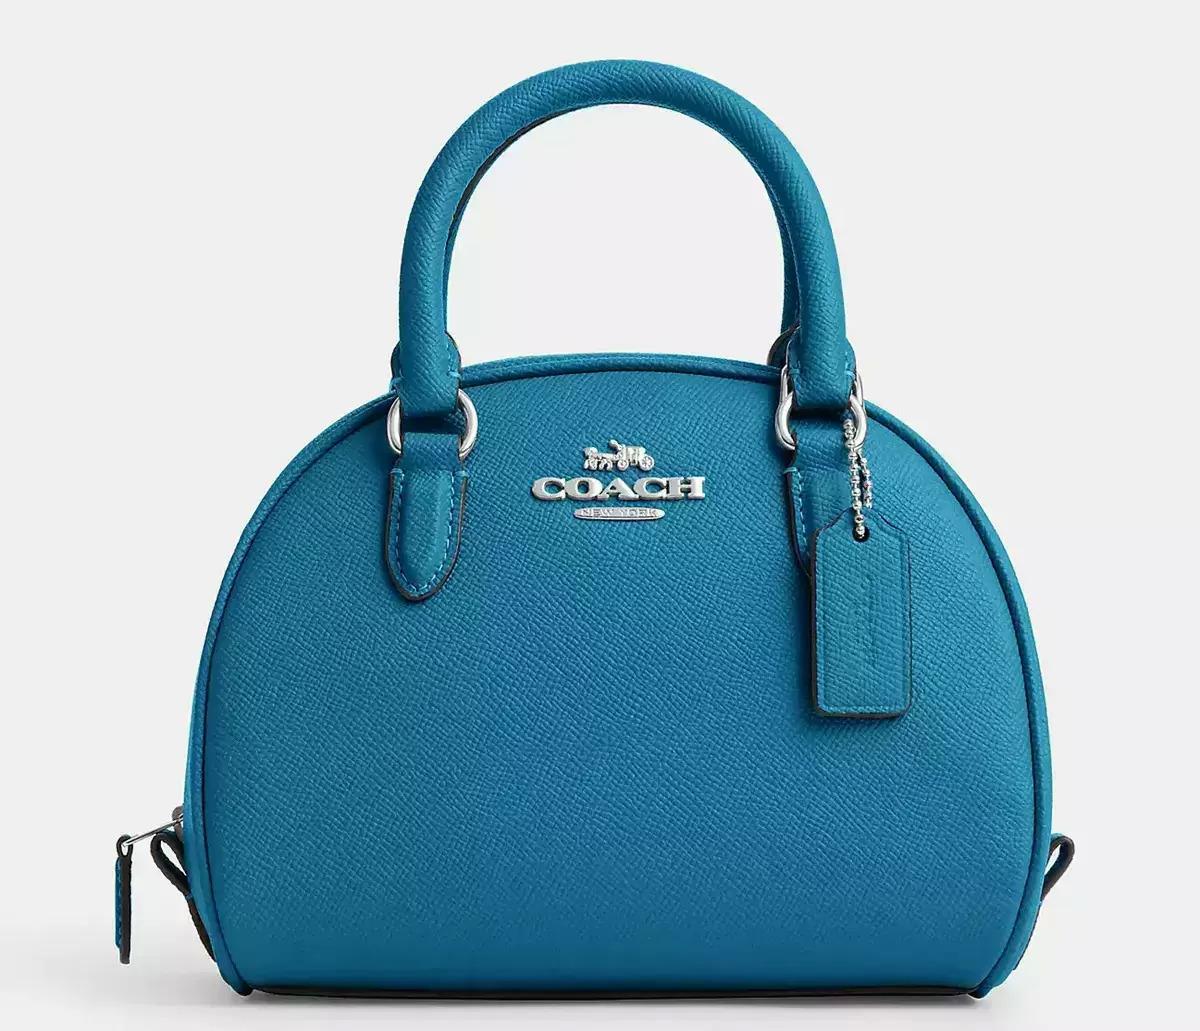 What's on Sale at the Coach Outlet Online?